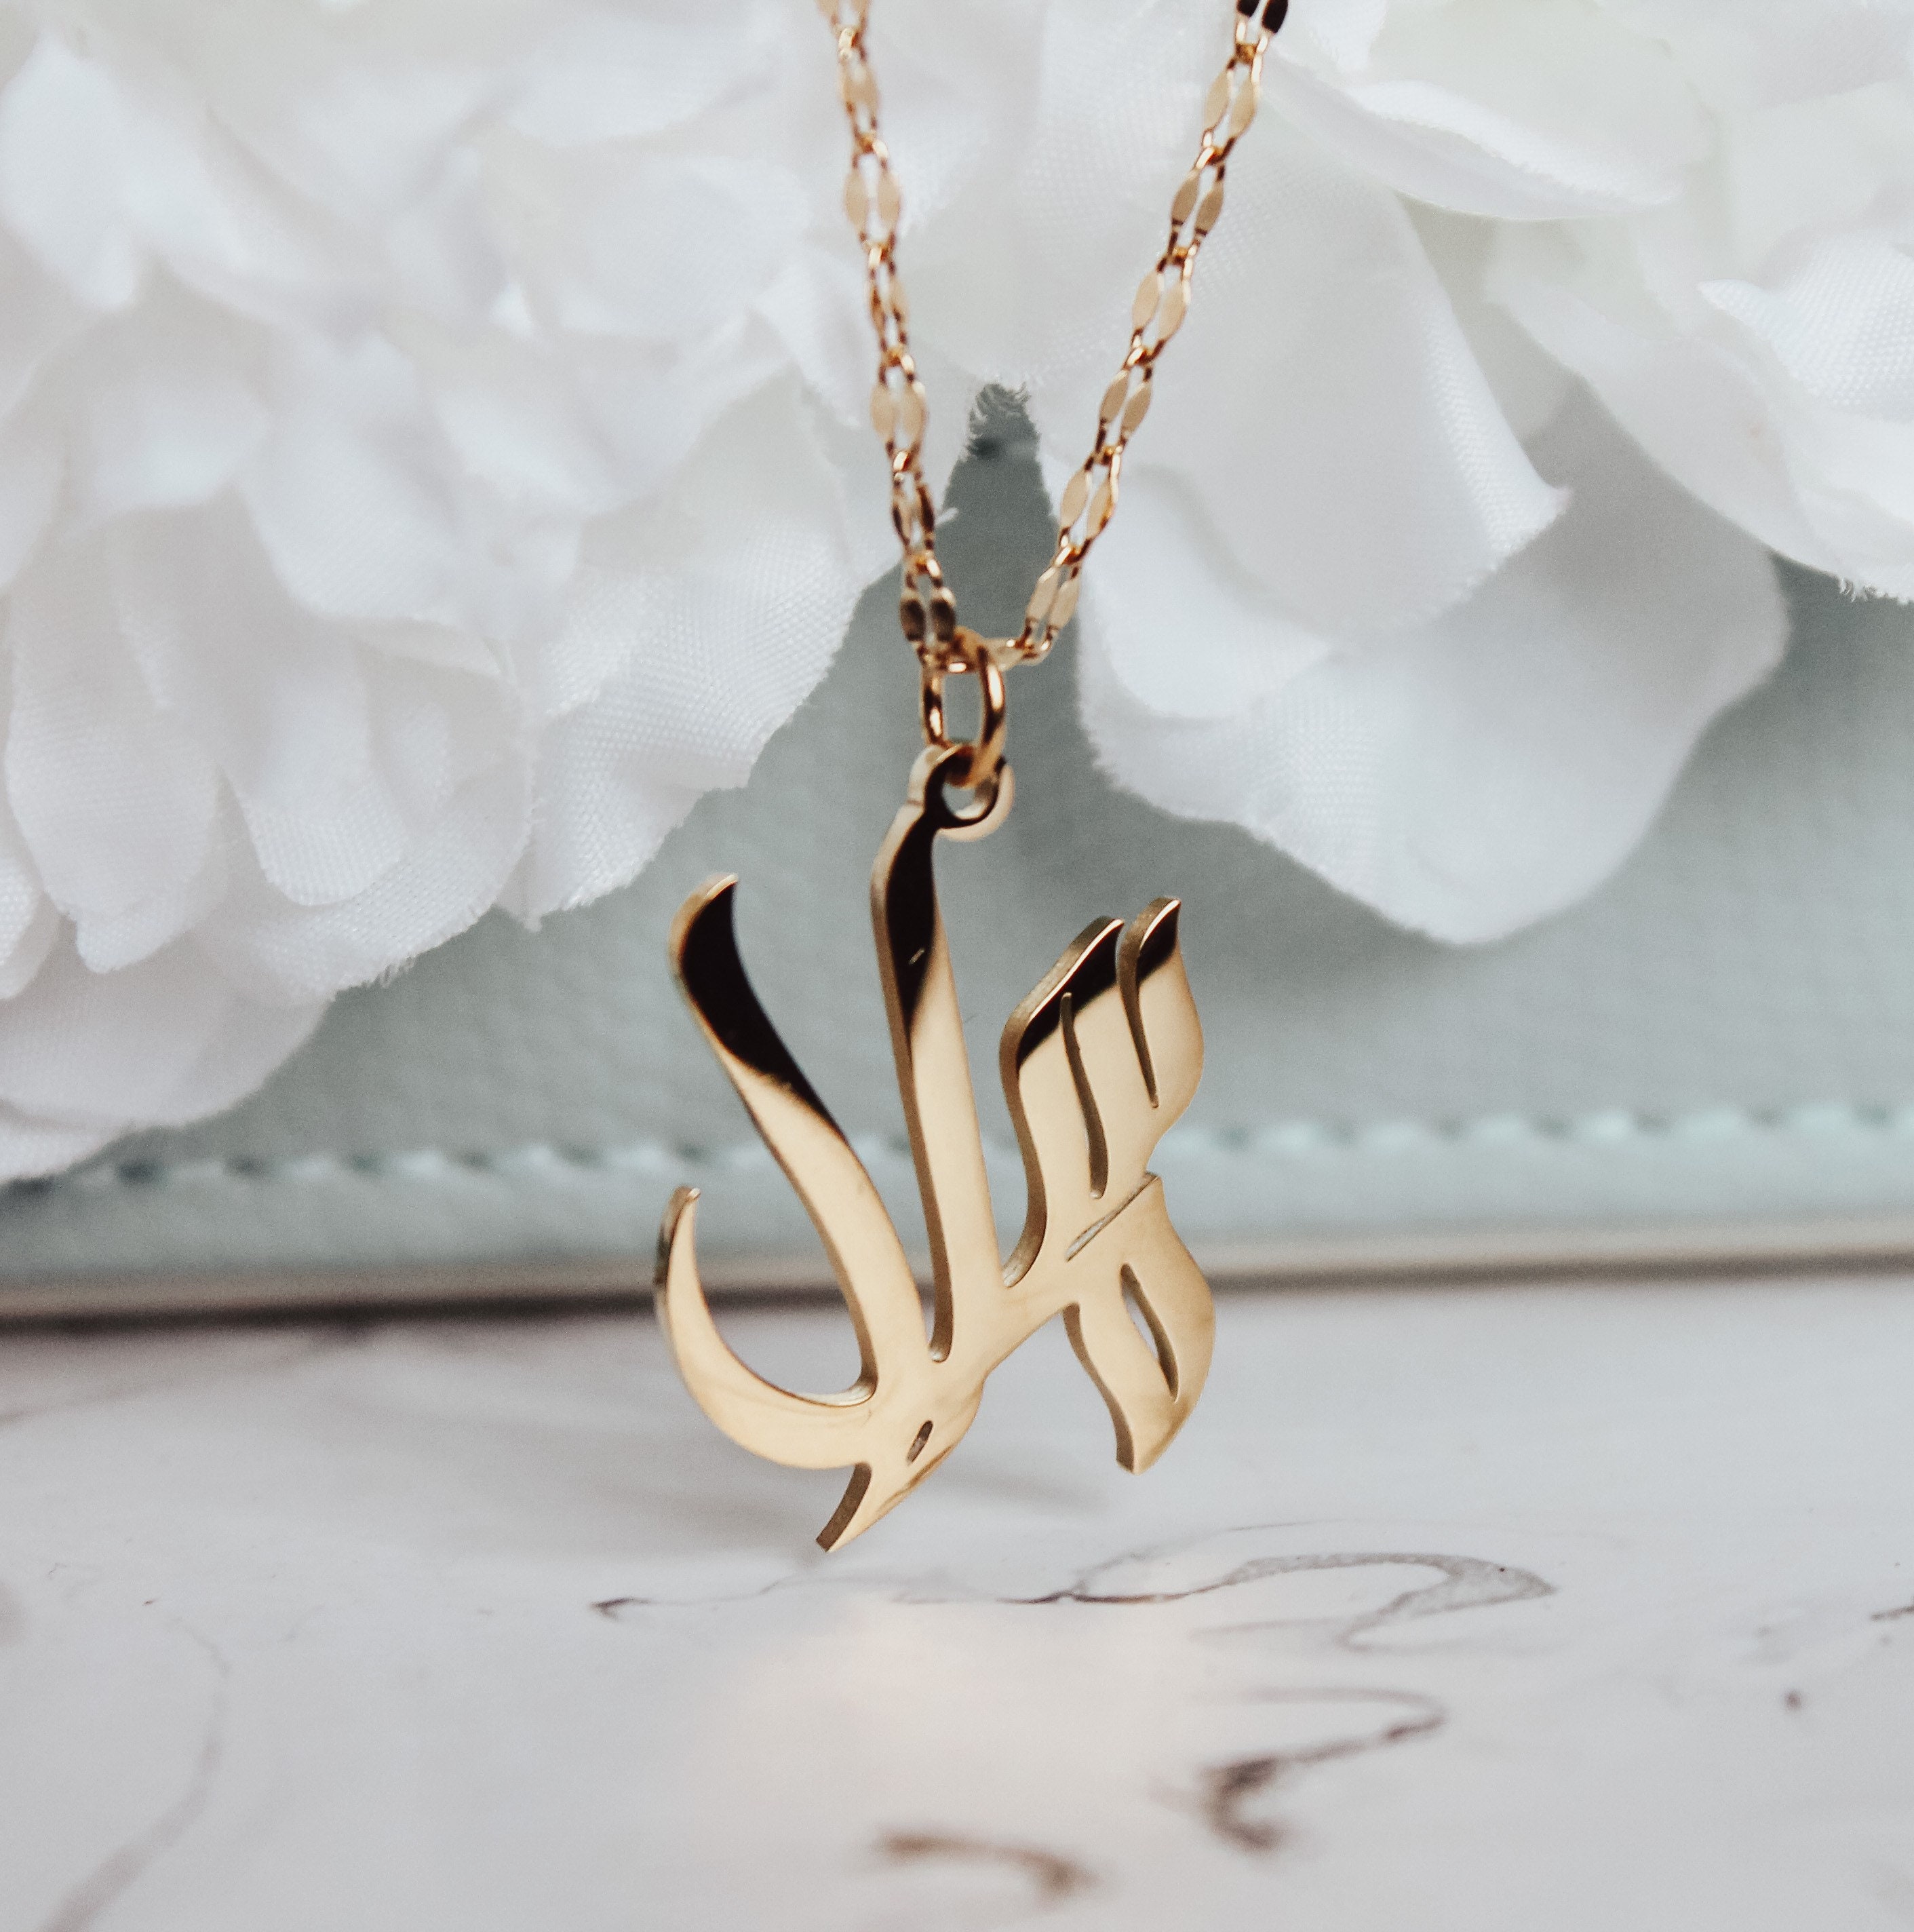 SALAM Peace Arabic Calligraphy Necklace 18Karat Gold Plated - Etsy